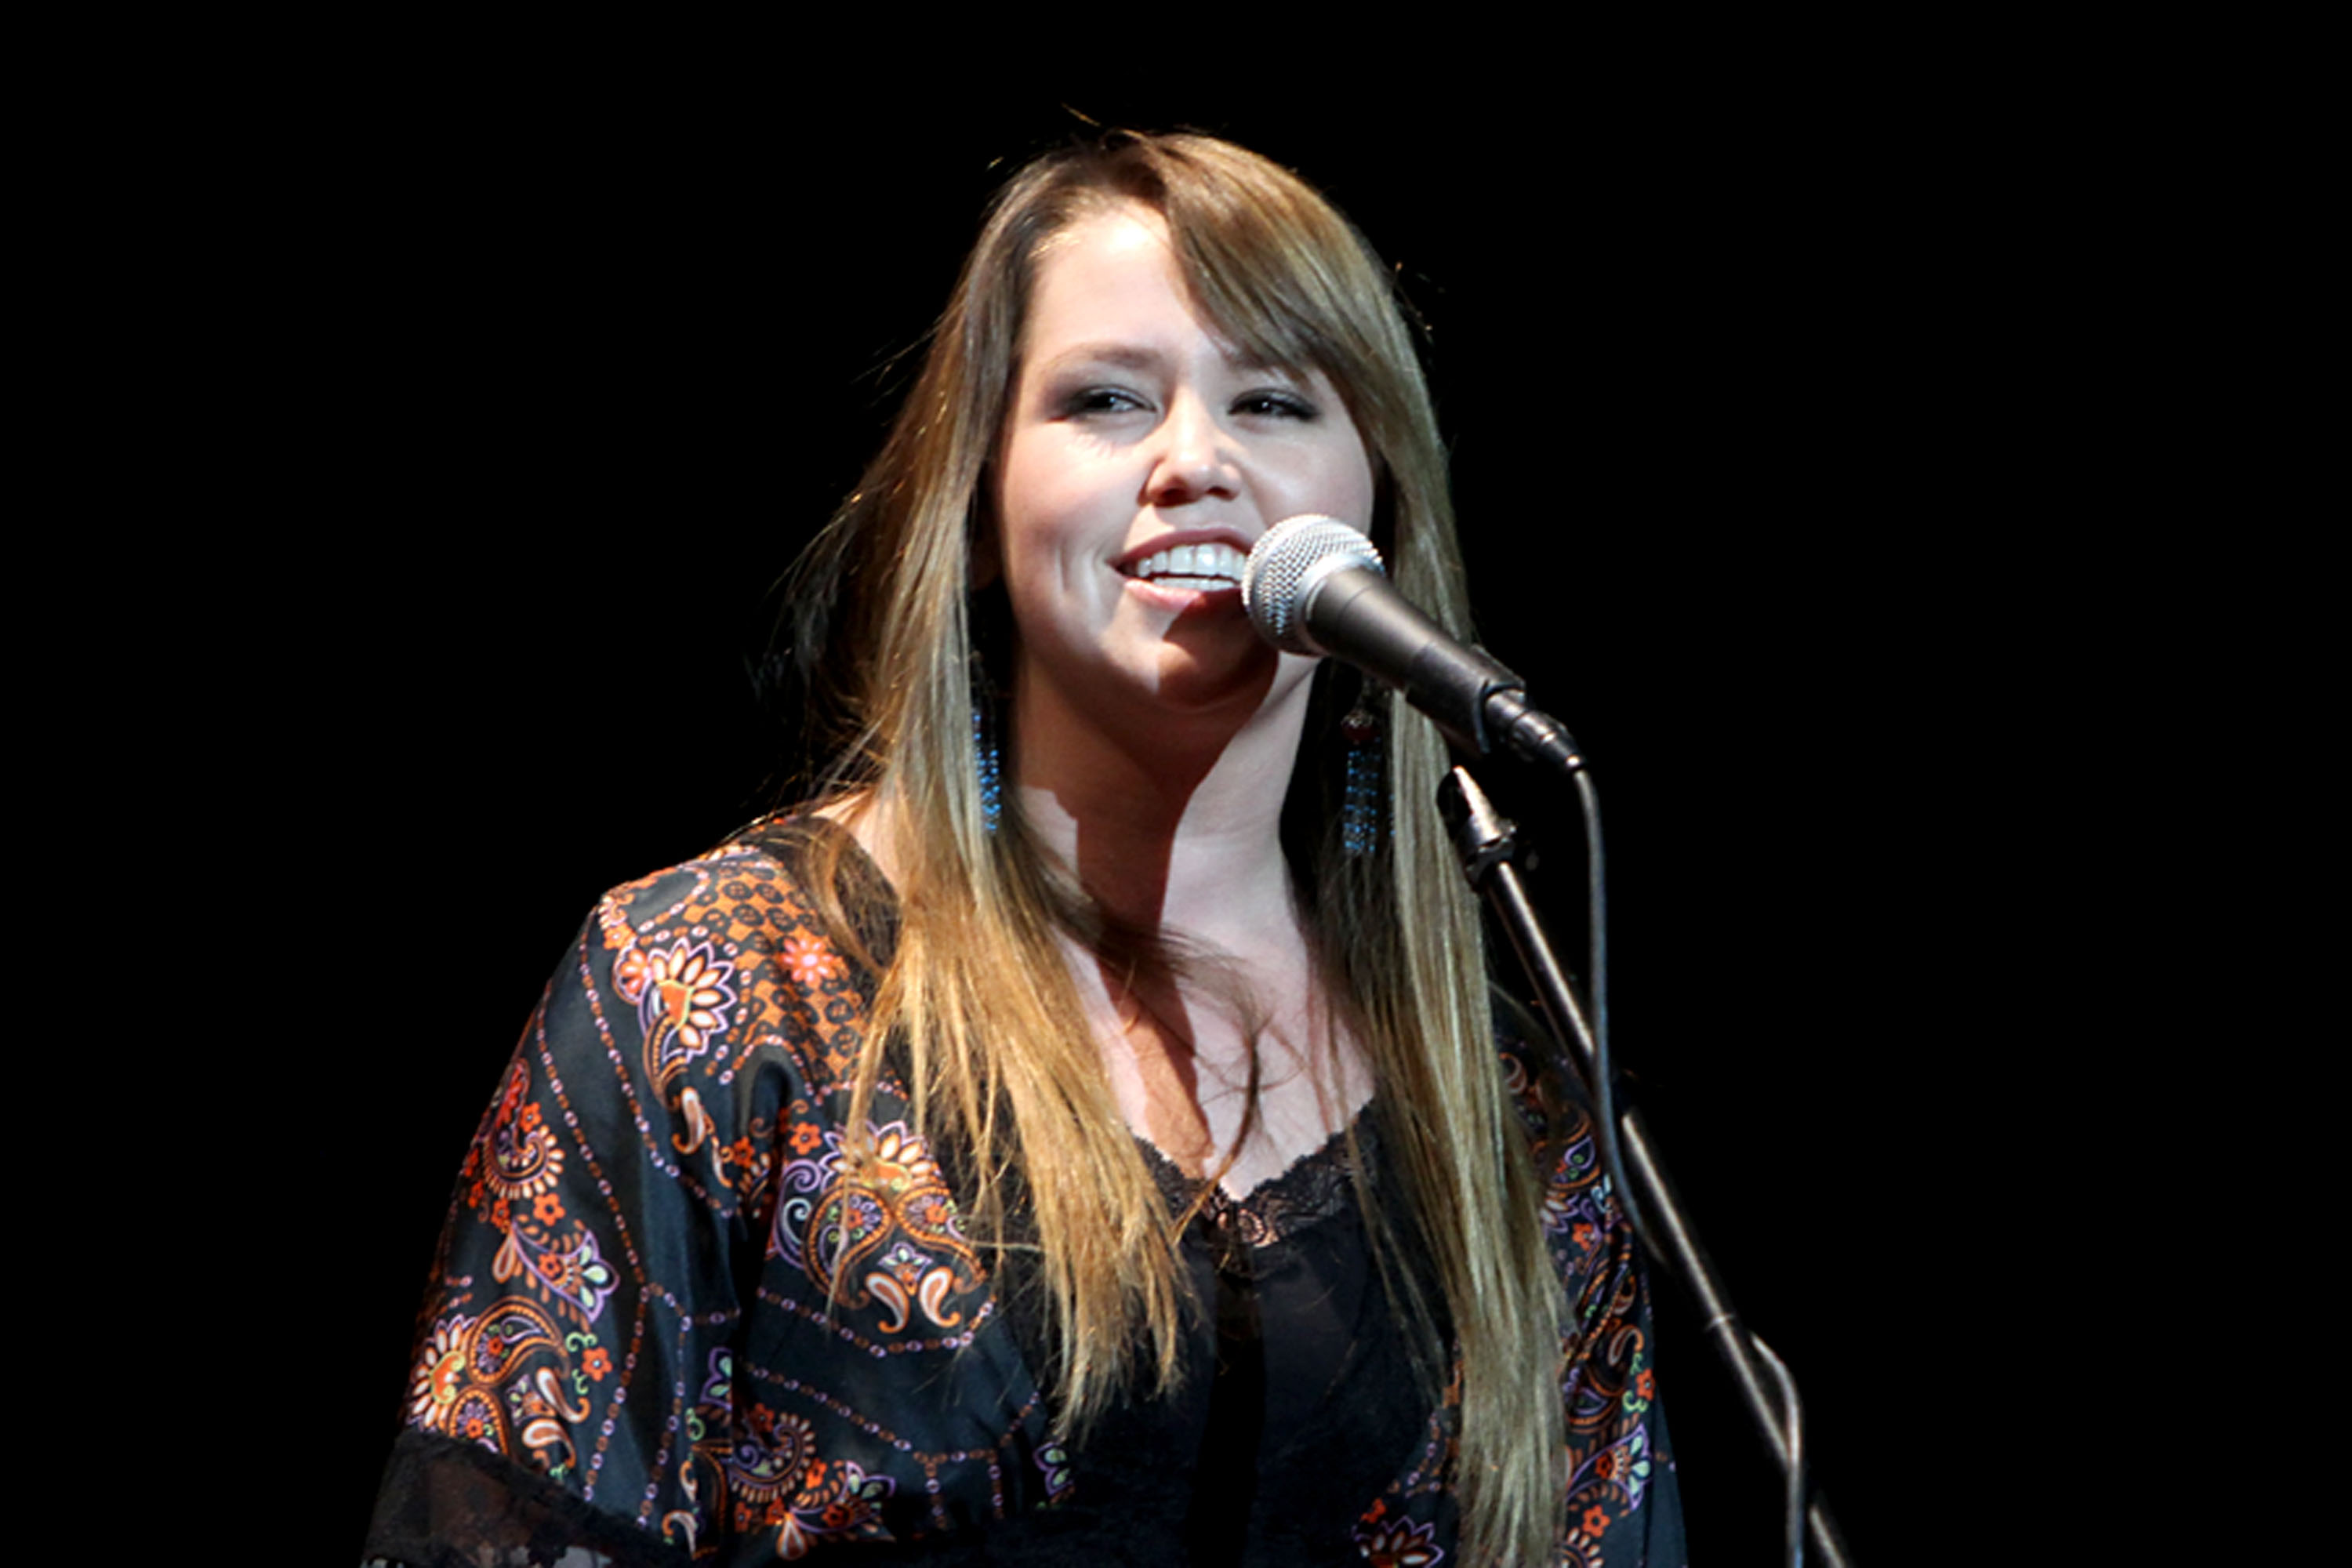 Jane Carrey performing at a Global Alliance For Transformational Entertainment event in Beverly Hills, California on February 4, 2012 | Source: Getty Images